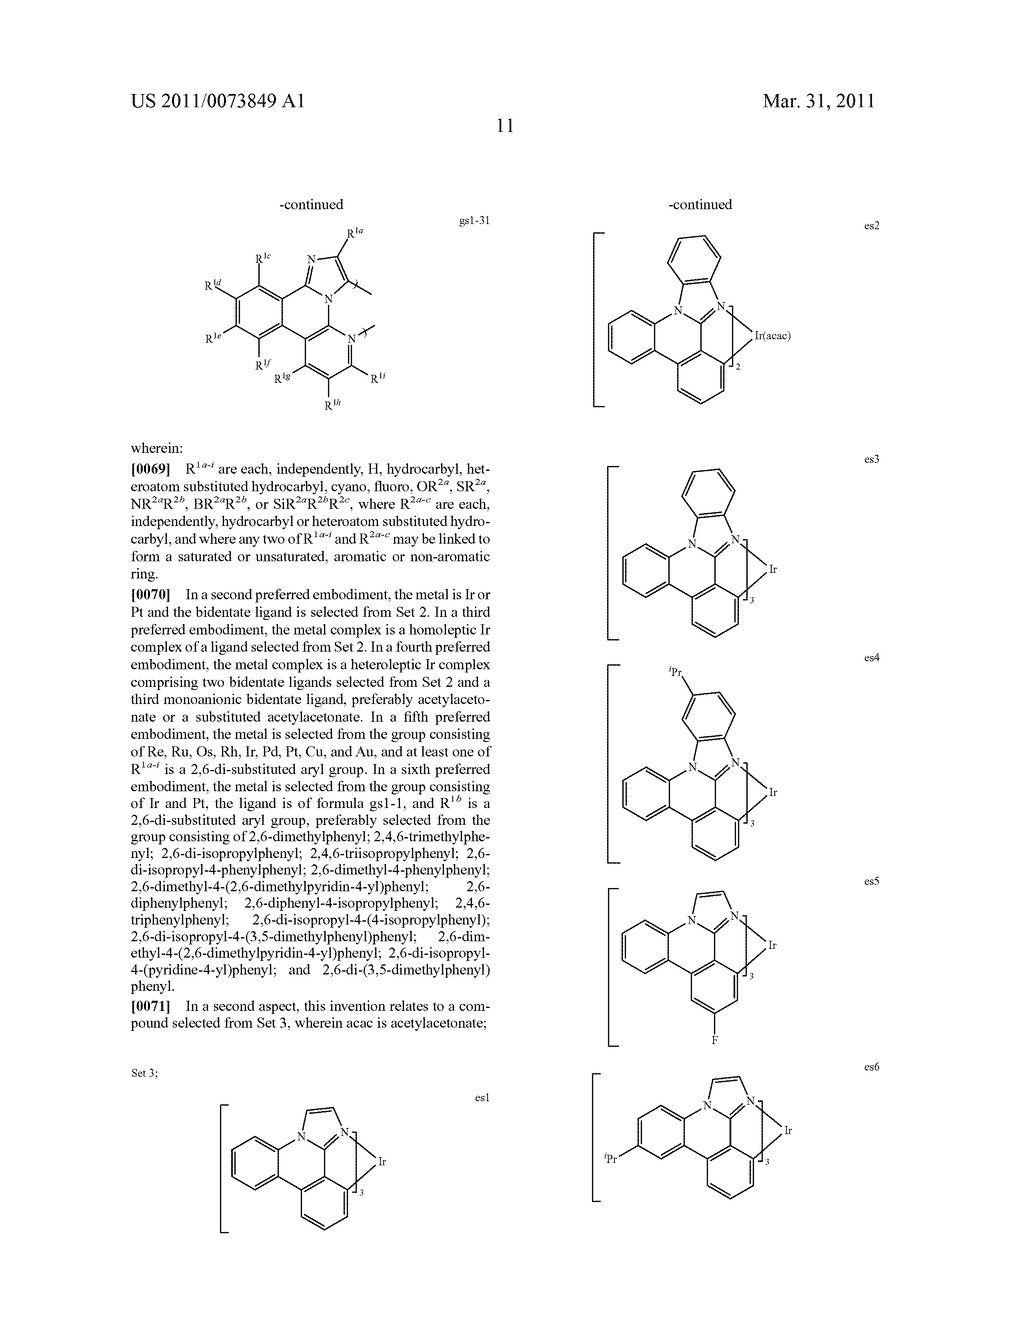 METAL COMPLEXES OF CYCLOMETALLATED IMIDAZO[1,2-f ]PHENANTHRIDINE AND DIIMIDAZO[1,2-a:1',2'-c ]QUNIAZOLINE LIGANDS AND ISOELECTRONIC AND BENZANNULATED ANALOGS THEREOF - diagram, schematic, and image 27